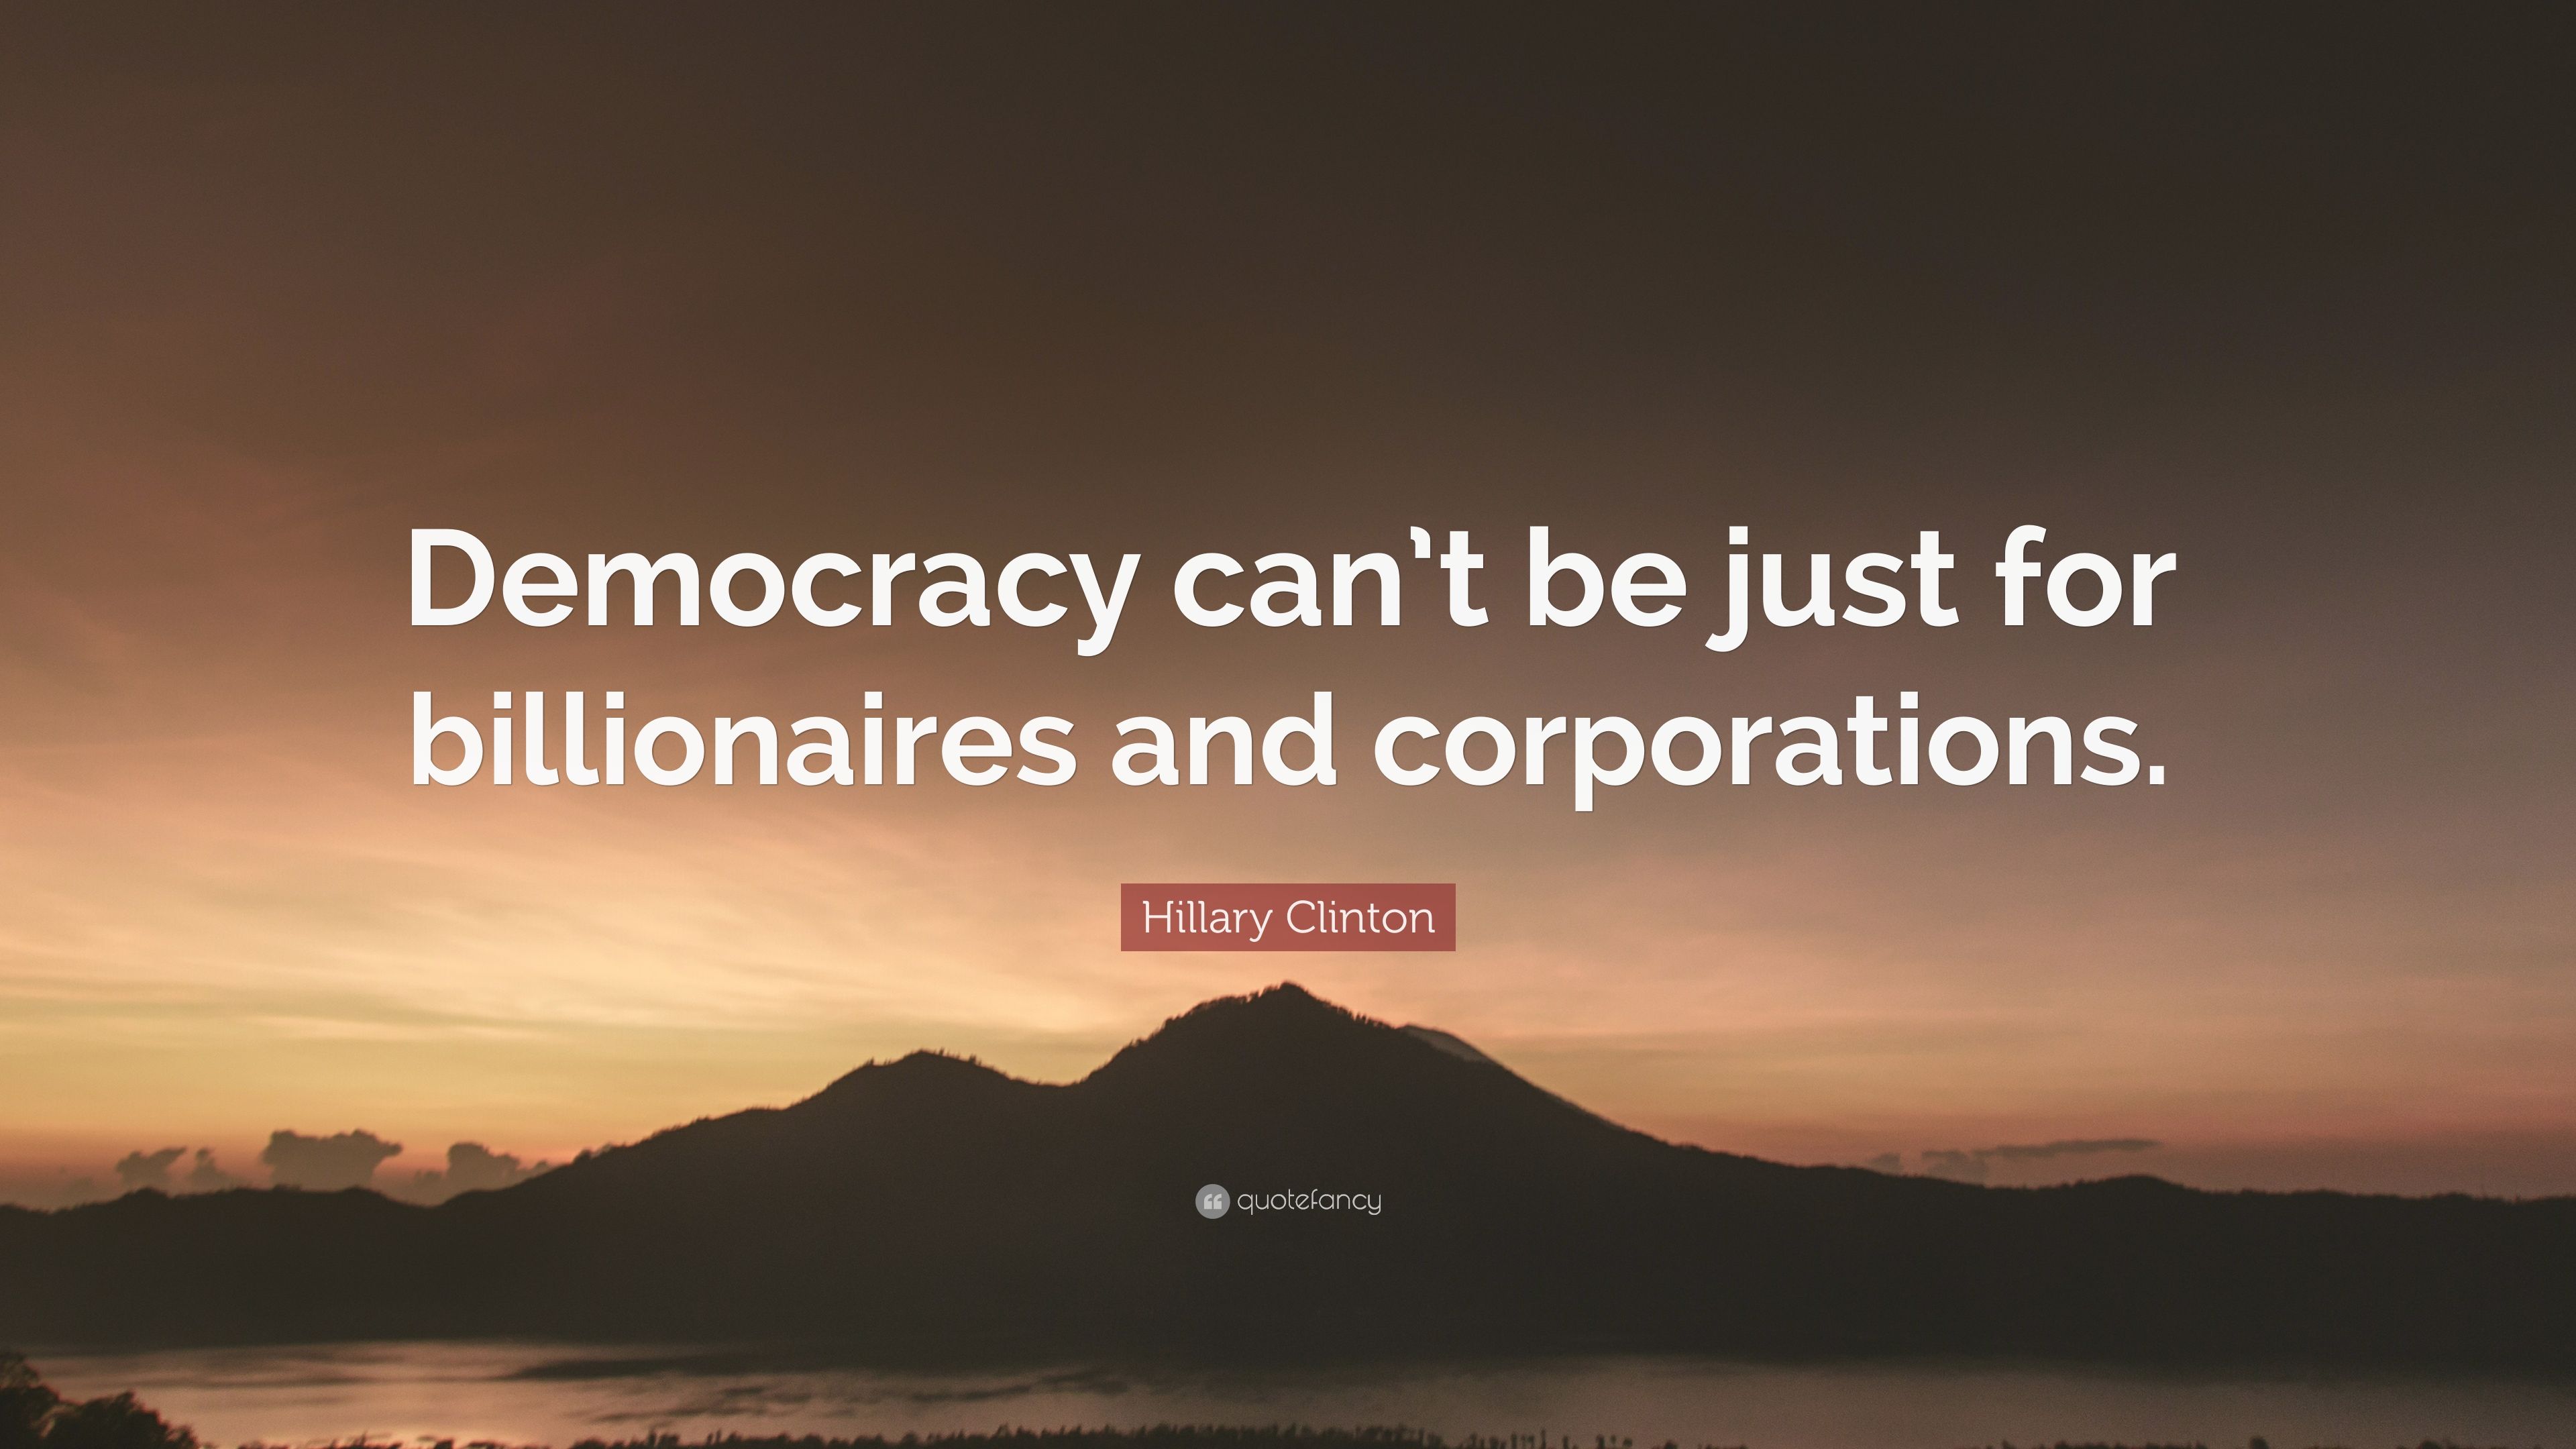 Hillary Clinton Quote: “Democracy can't be just for billionaires